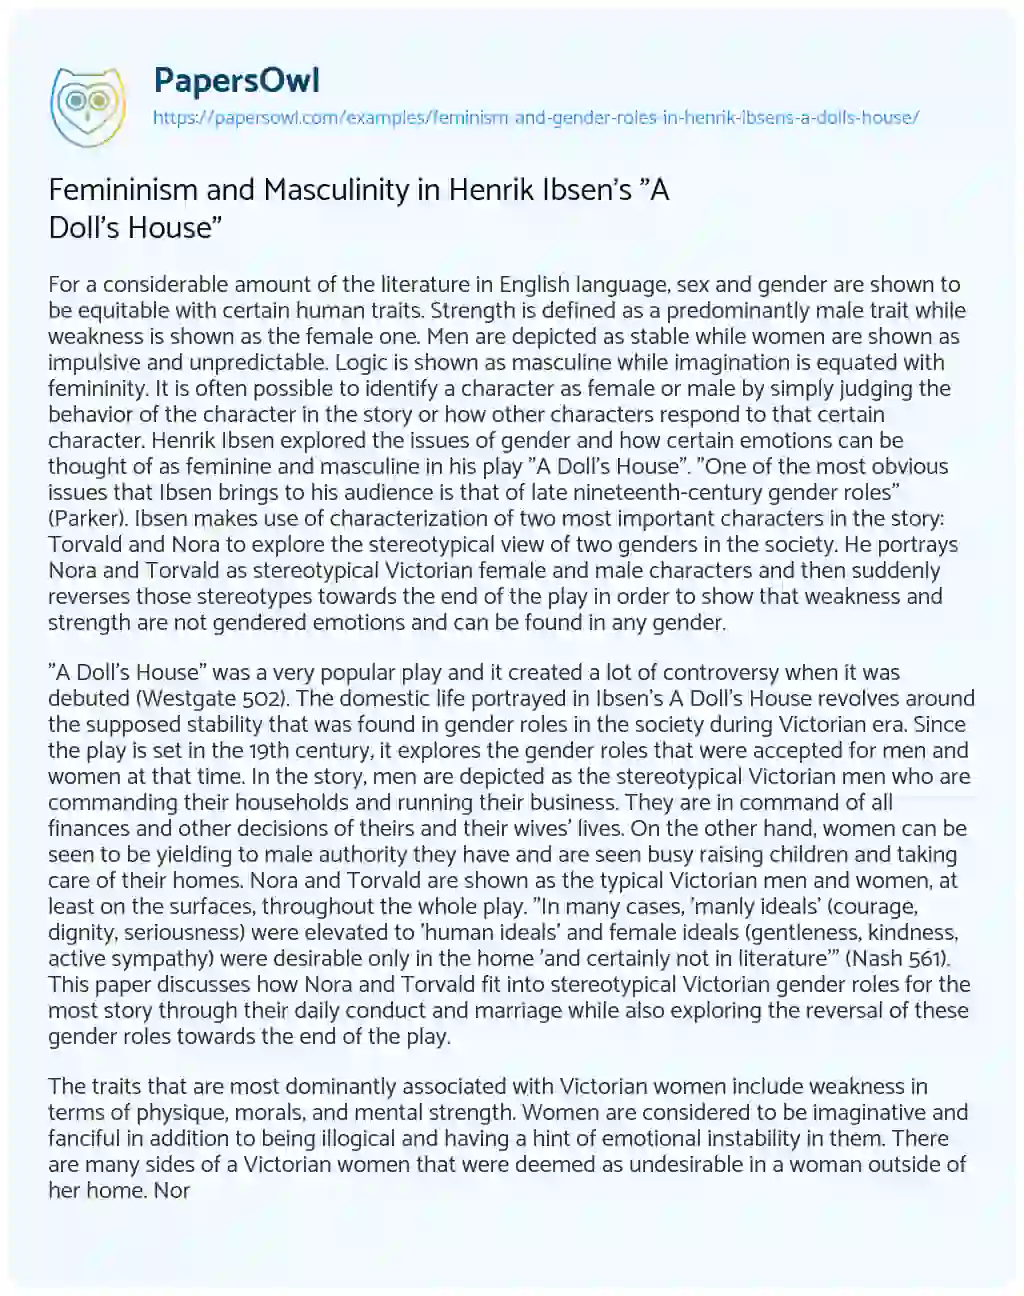 Femininism and Masculinity in Henrik Ibsen’s “A Doll’s House” essay